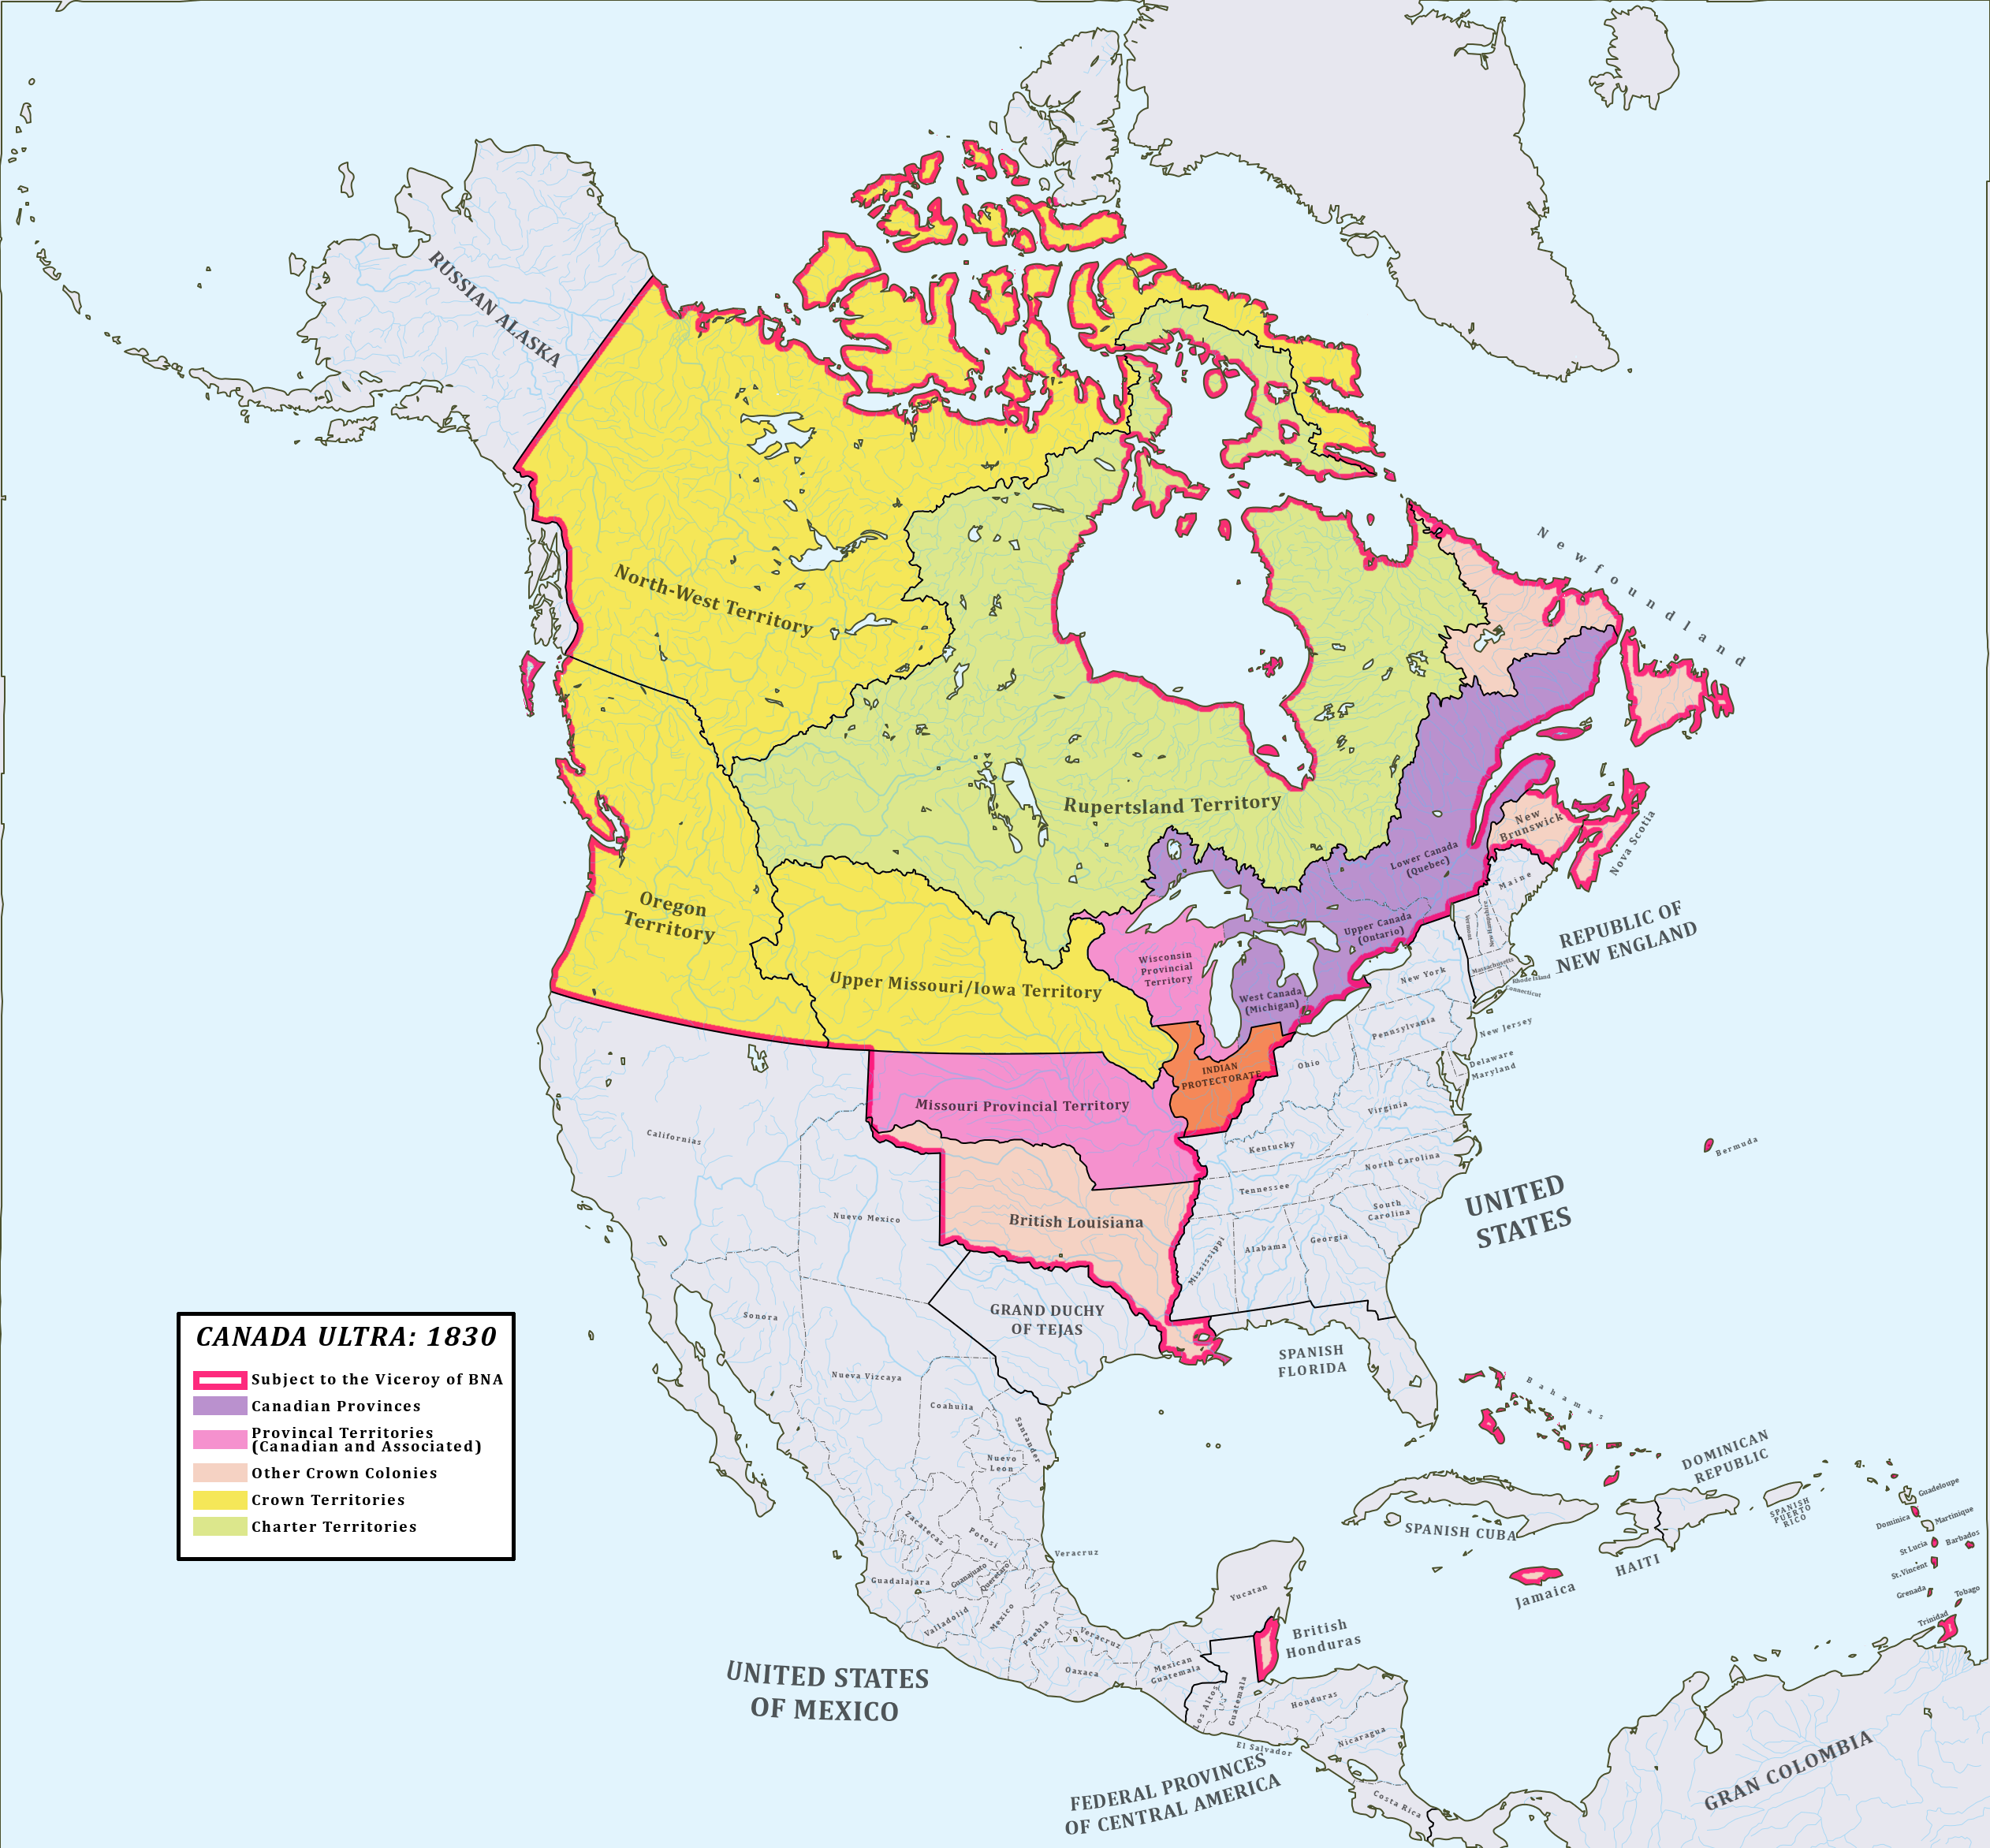 dathiscanada1830_provisional_by_iainfluff.png